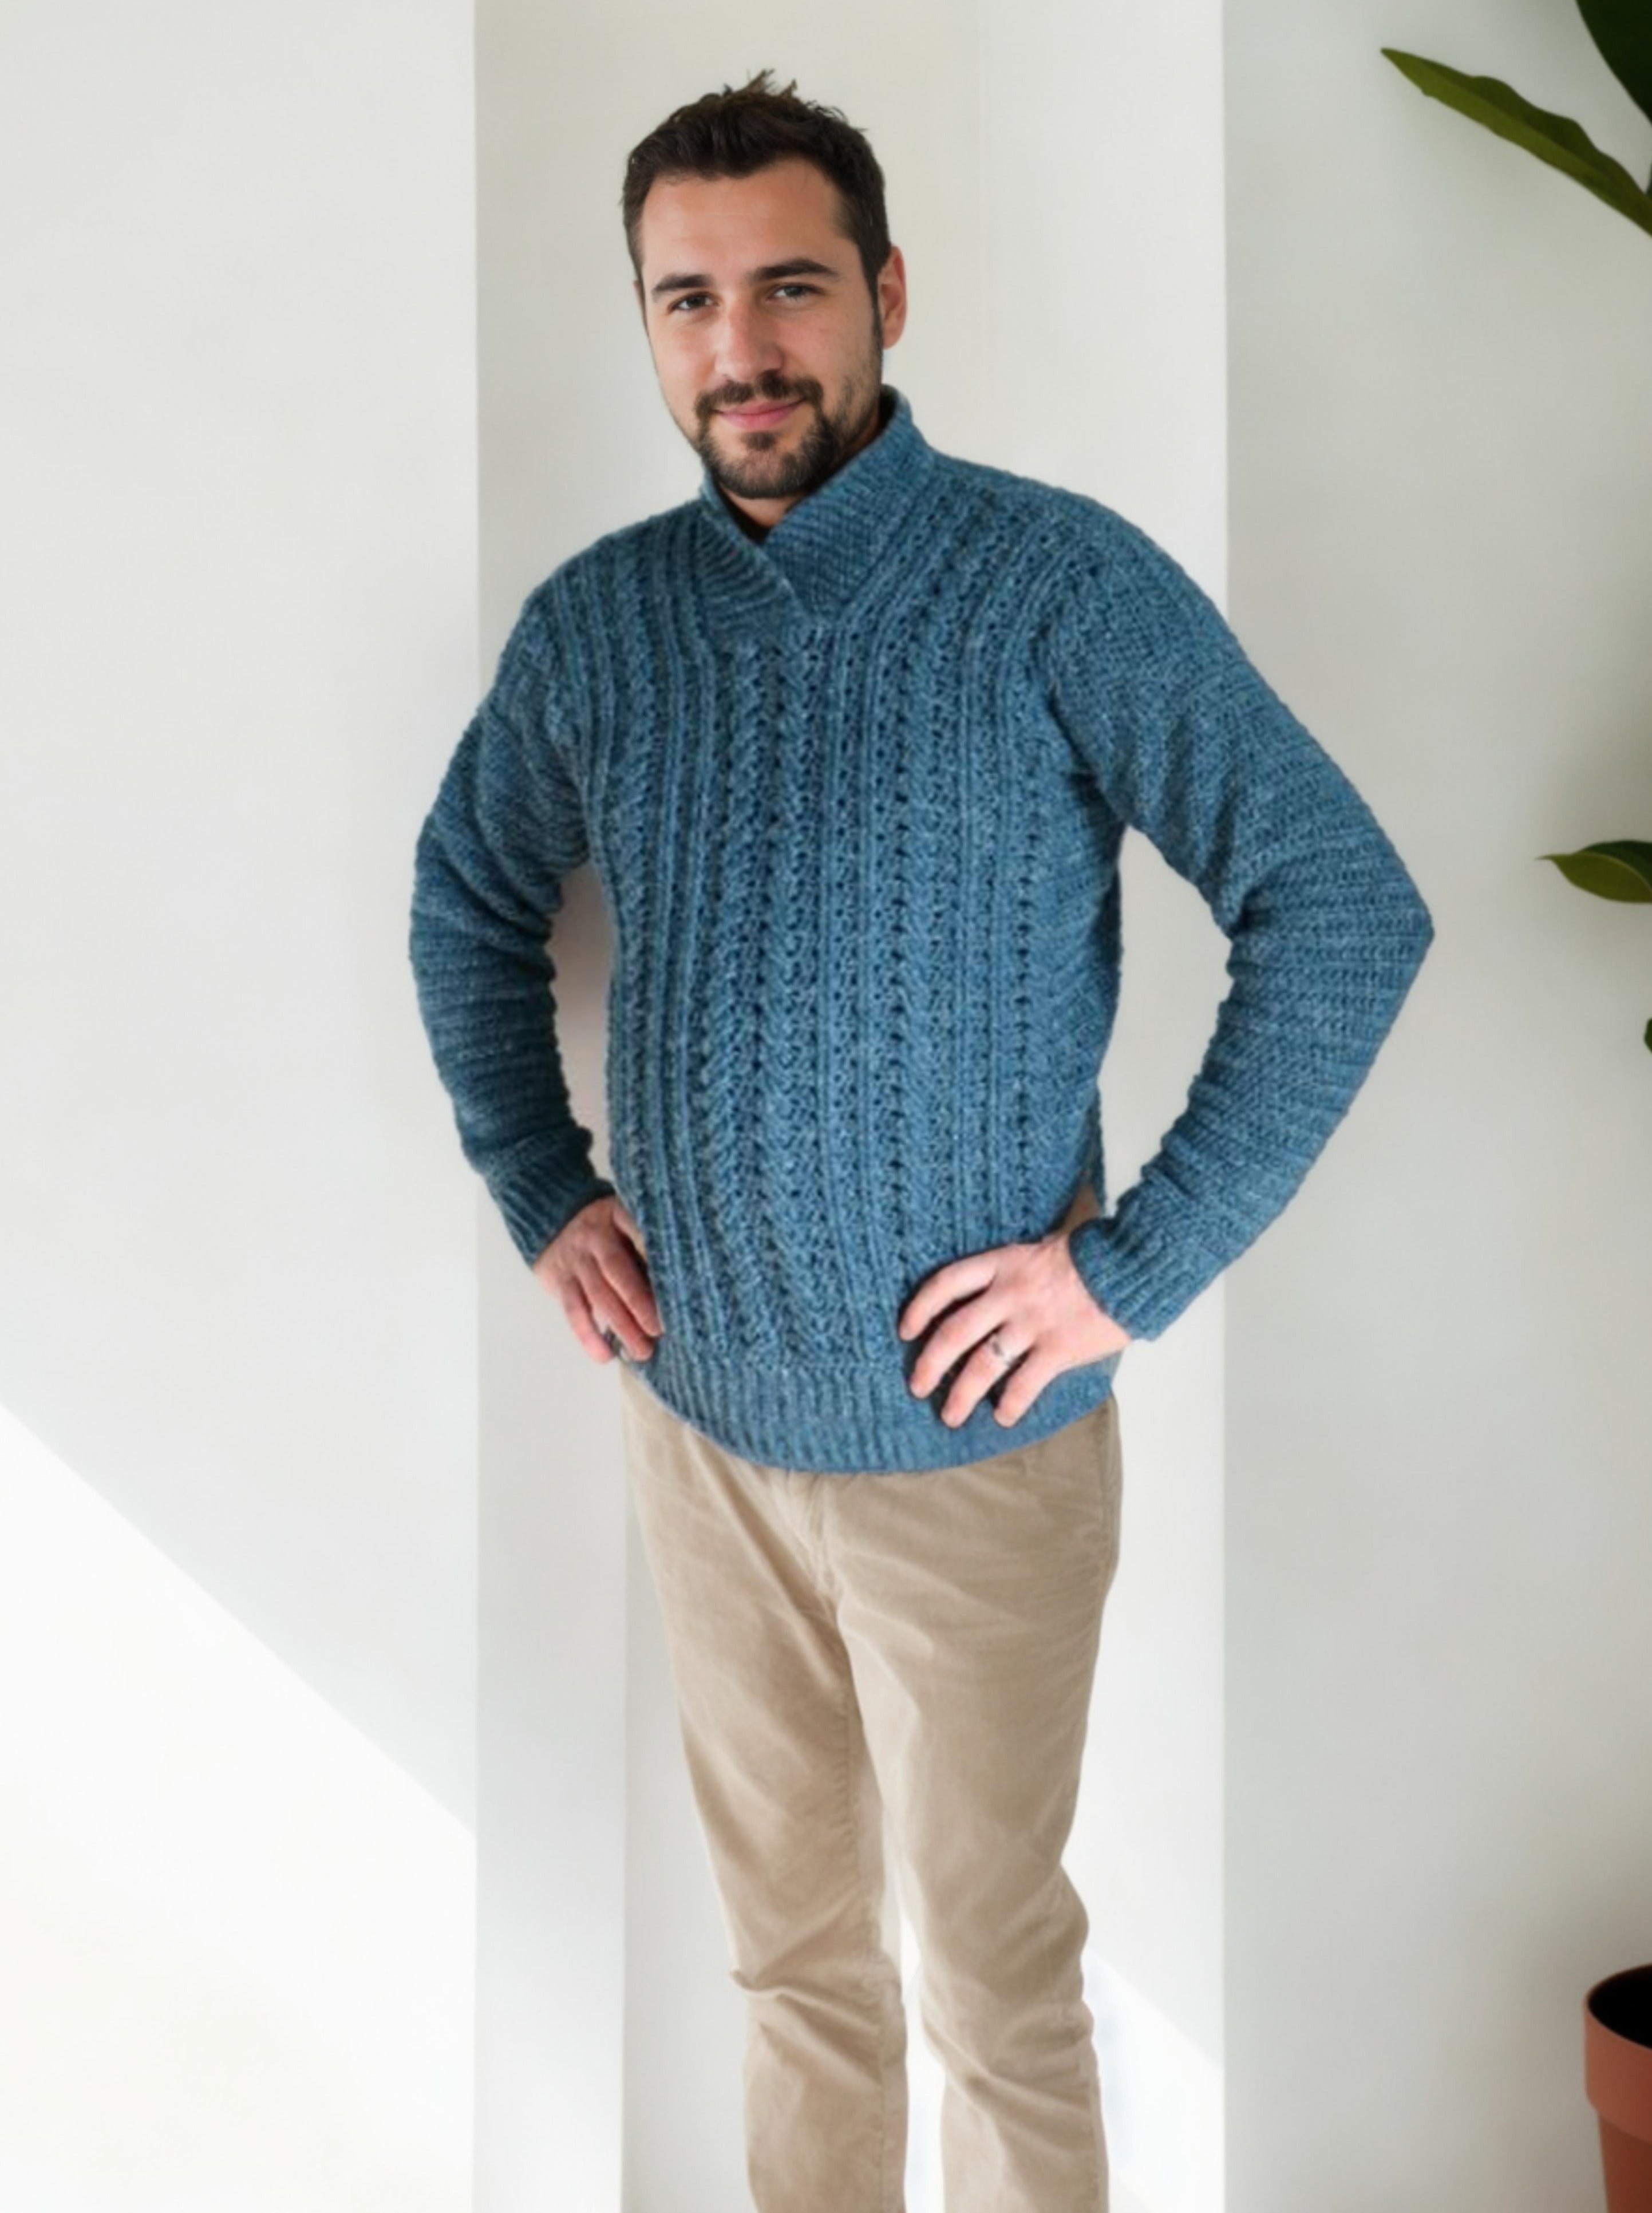 Cerulean Cabled Sweater